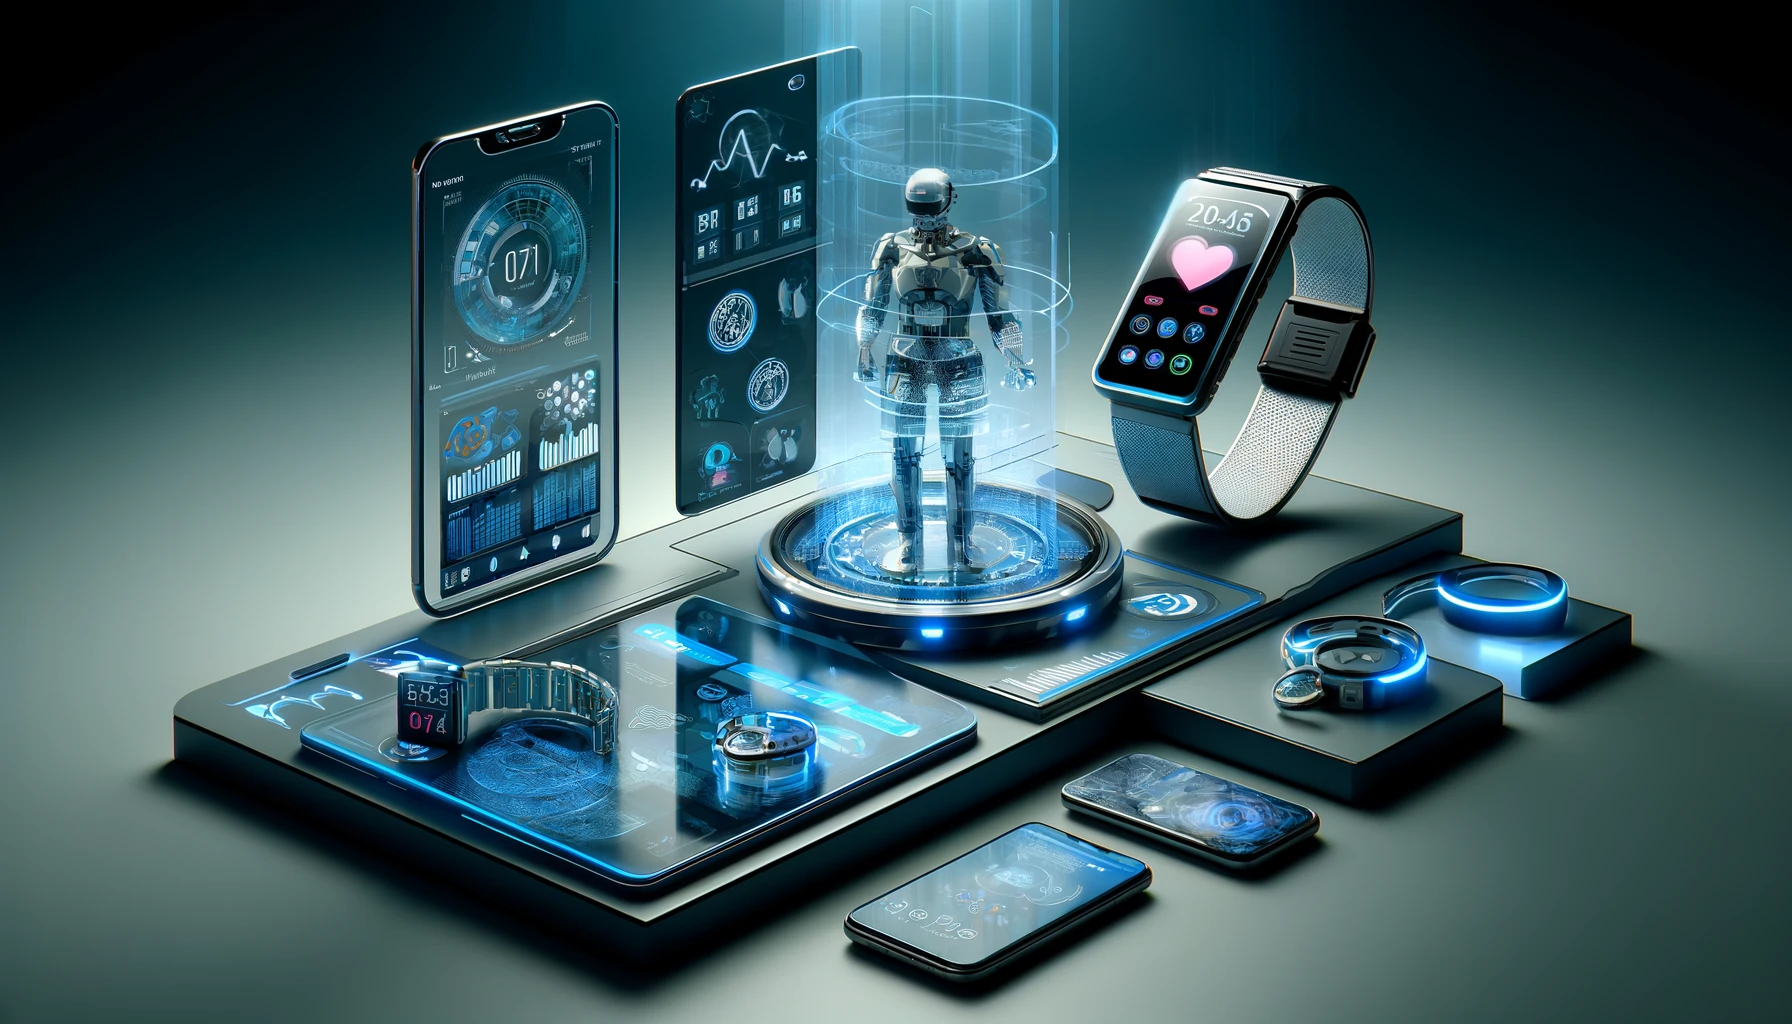 A modern display of 2024's top mobile technologies including a foldable phone, wearable health monitor, VR headset, and an AR-enabled smartphone in a futuristic setting.